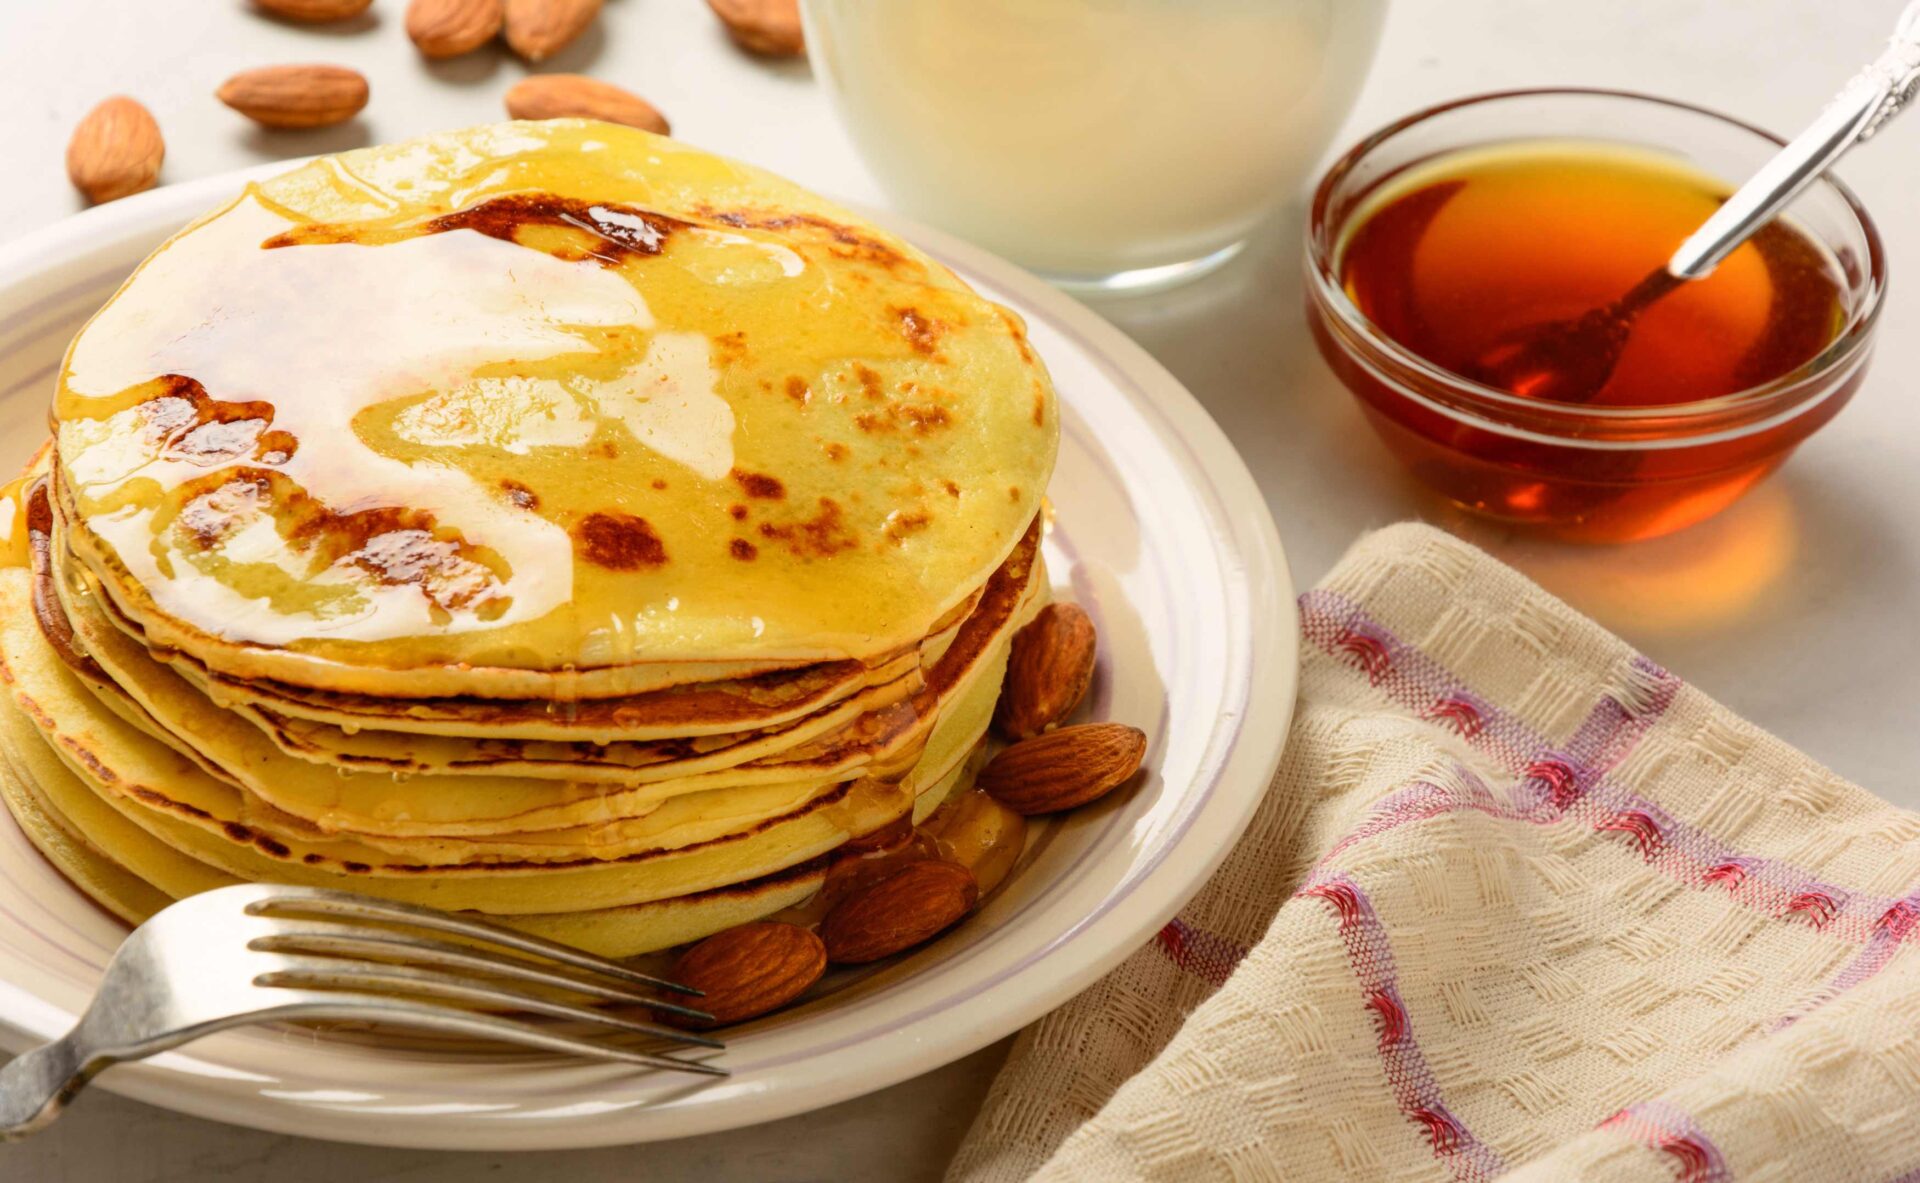 Plate of pancakes with almonds and a bowl of syrup - Organic Almond Flour Baking Mixes